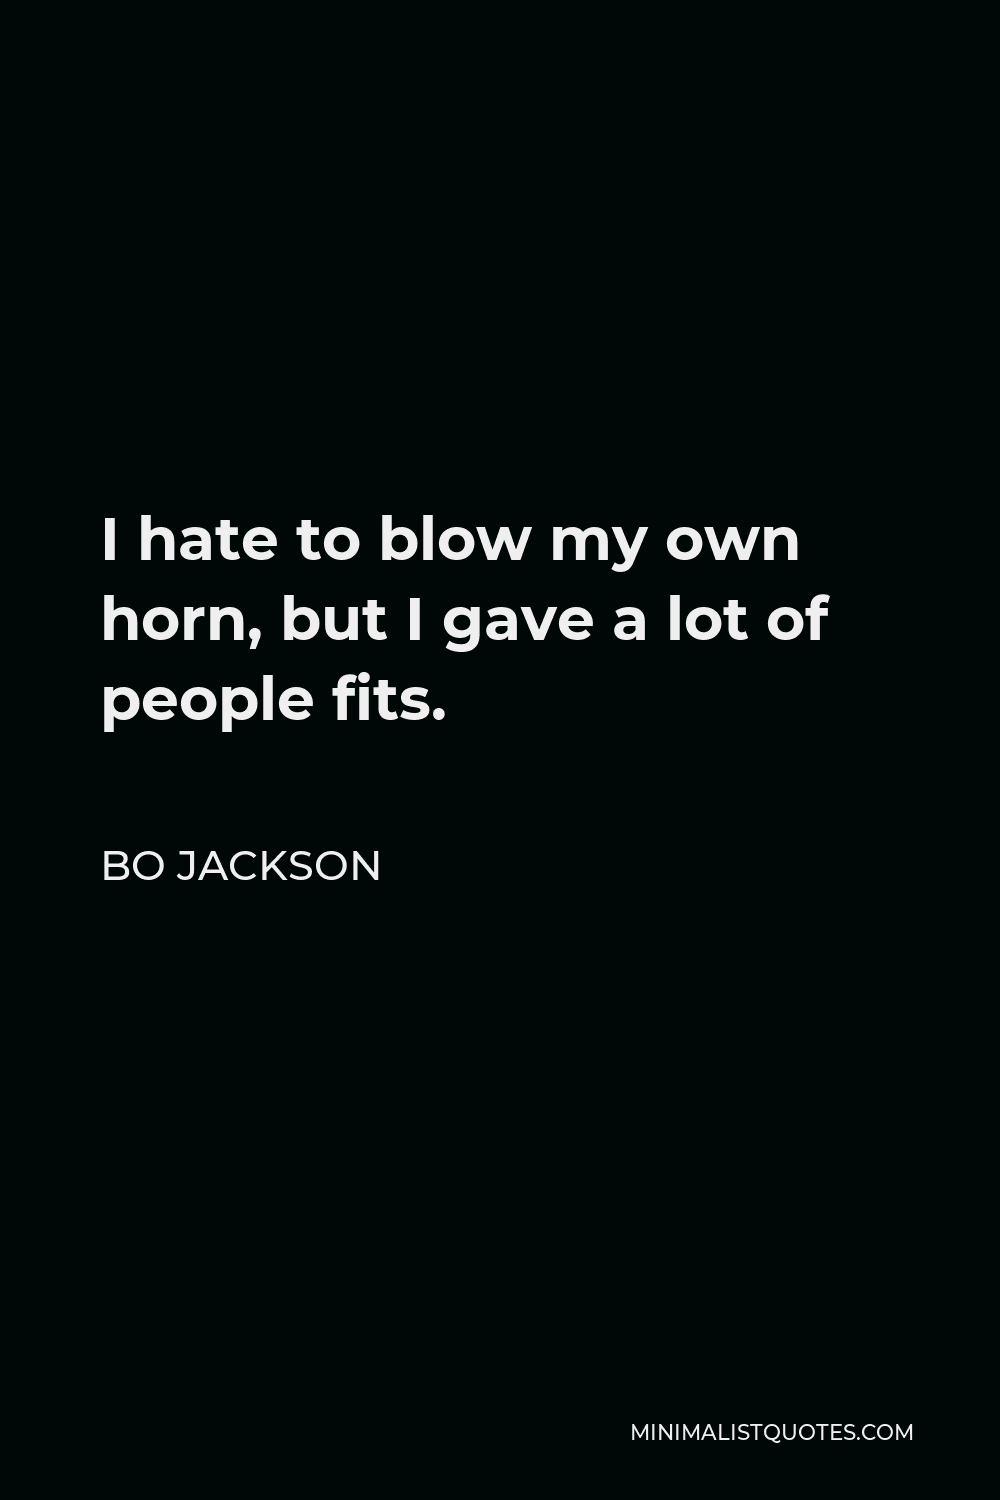 Bo Jackson Quote - I hate to blow my own horn, but I gave a lot of people fits.